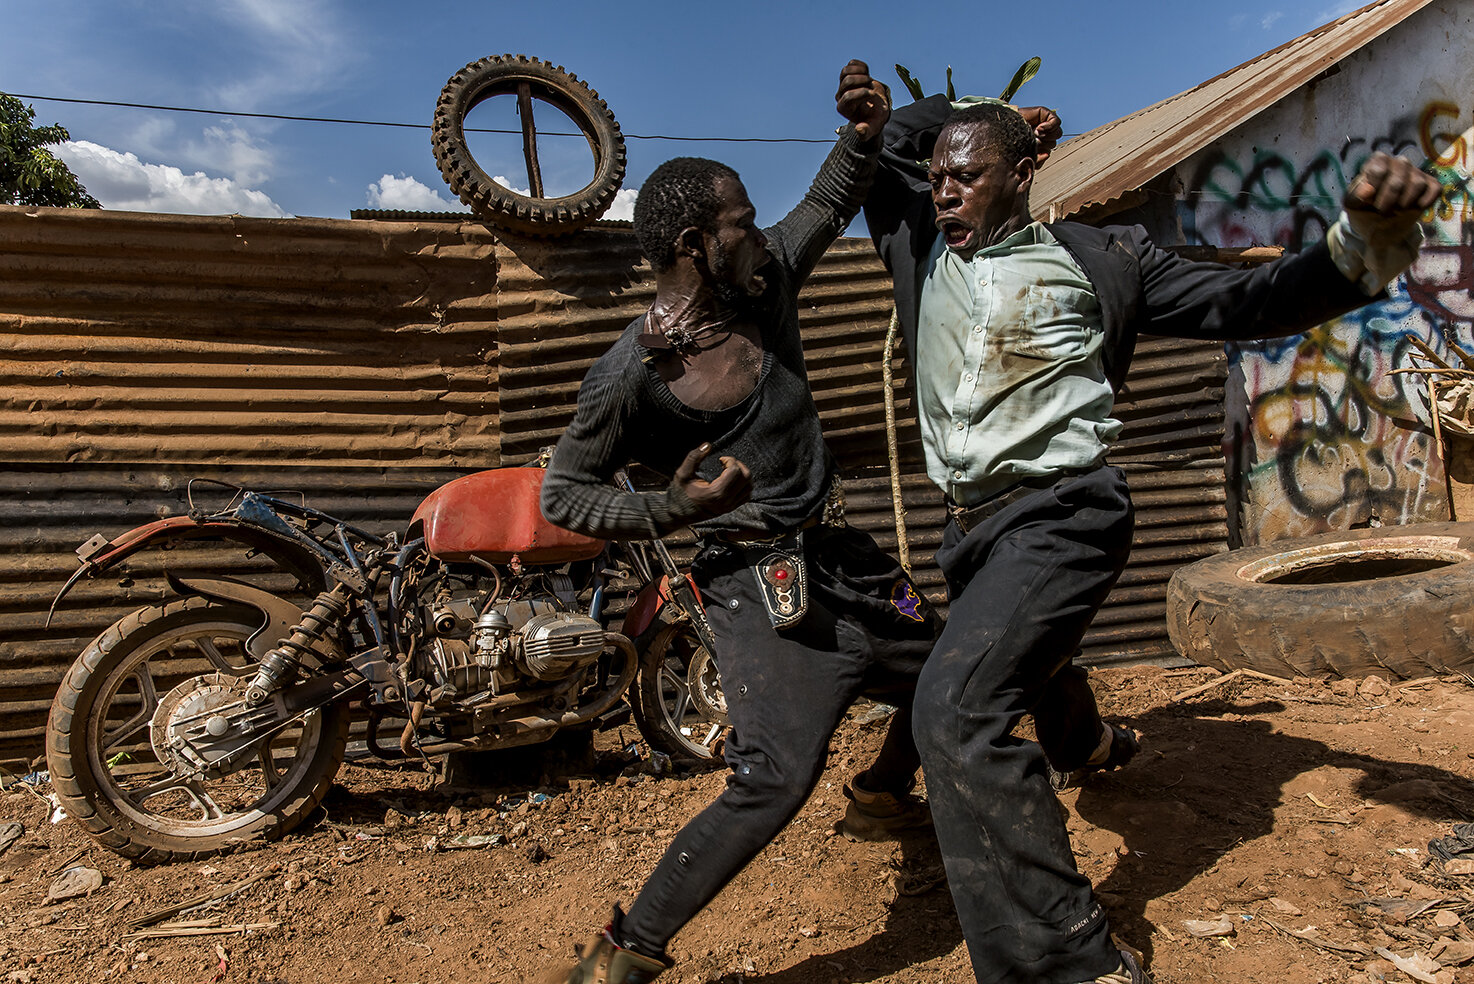  Two main actors, stunt and kung fu practitioners of Wakaliwood, Appollo ASIIMWE and Kasekende Mustafa KATWALO a.k.a. Mustafa Lee fight each other in a remake of the Japanese Movie, Rashomon. The project is sponsored and initiated by a French artist,